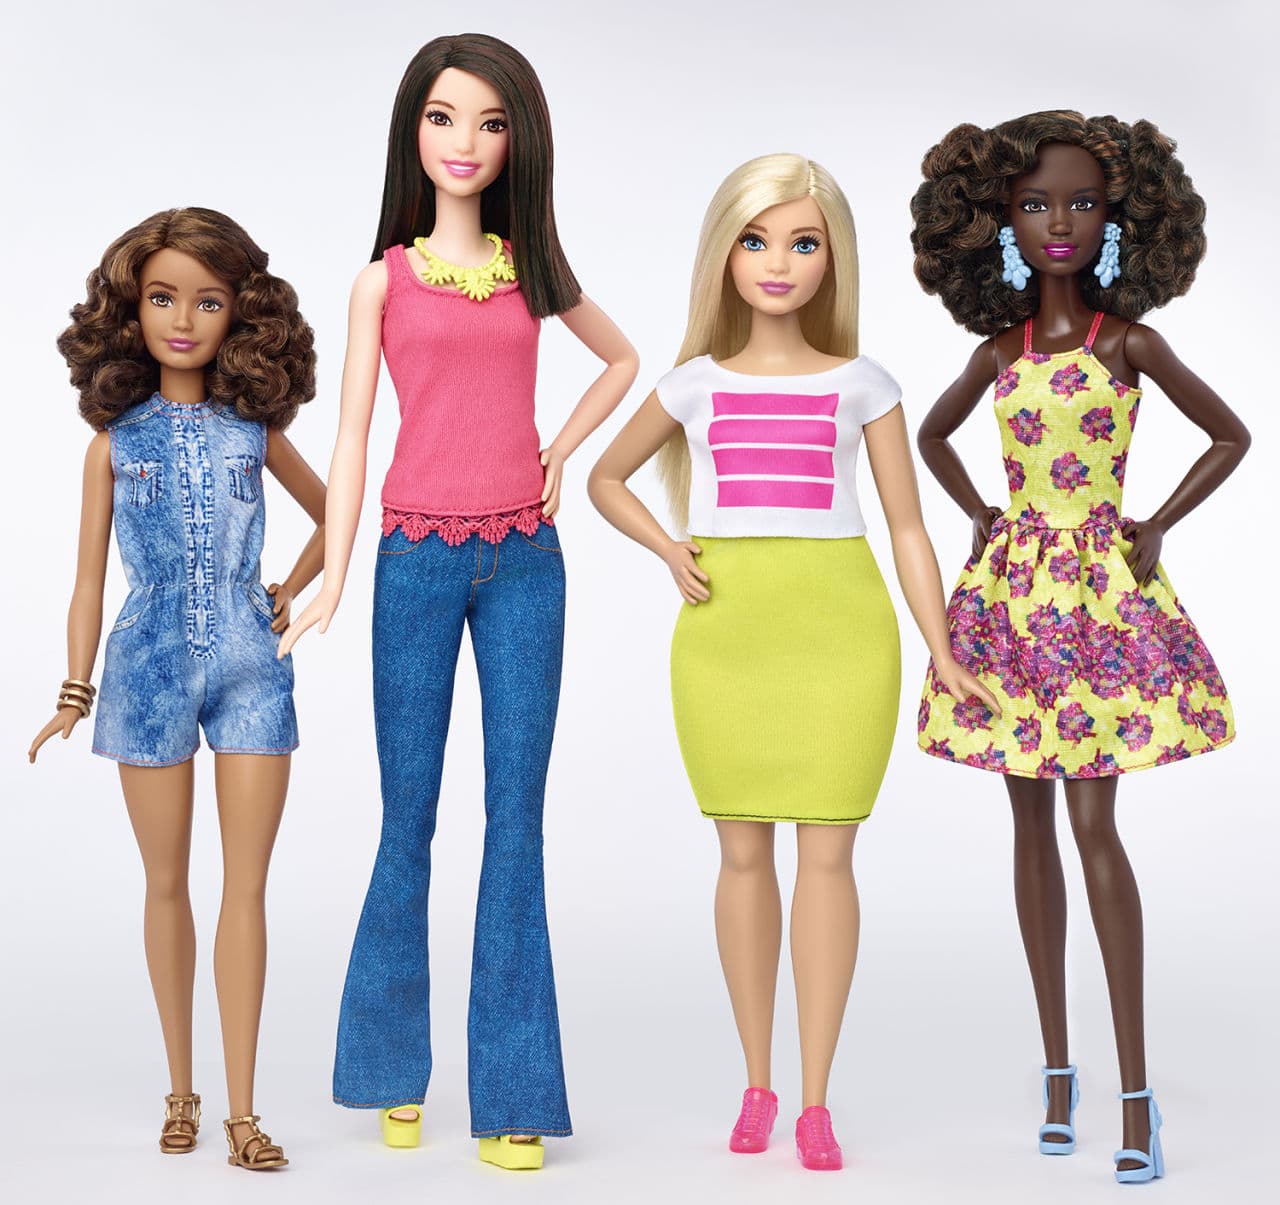 This file photo provided by Mattel shows a group of new Barbie dolls introduced in January 2016. (AP)